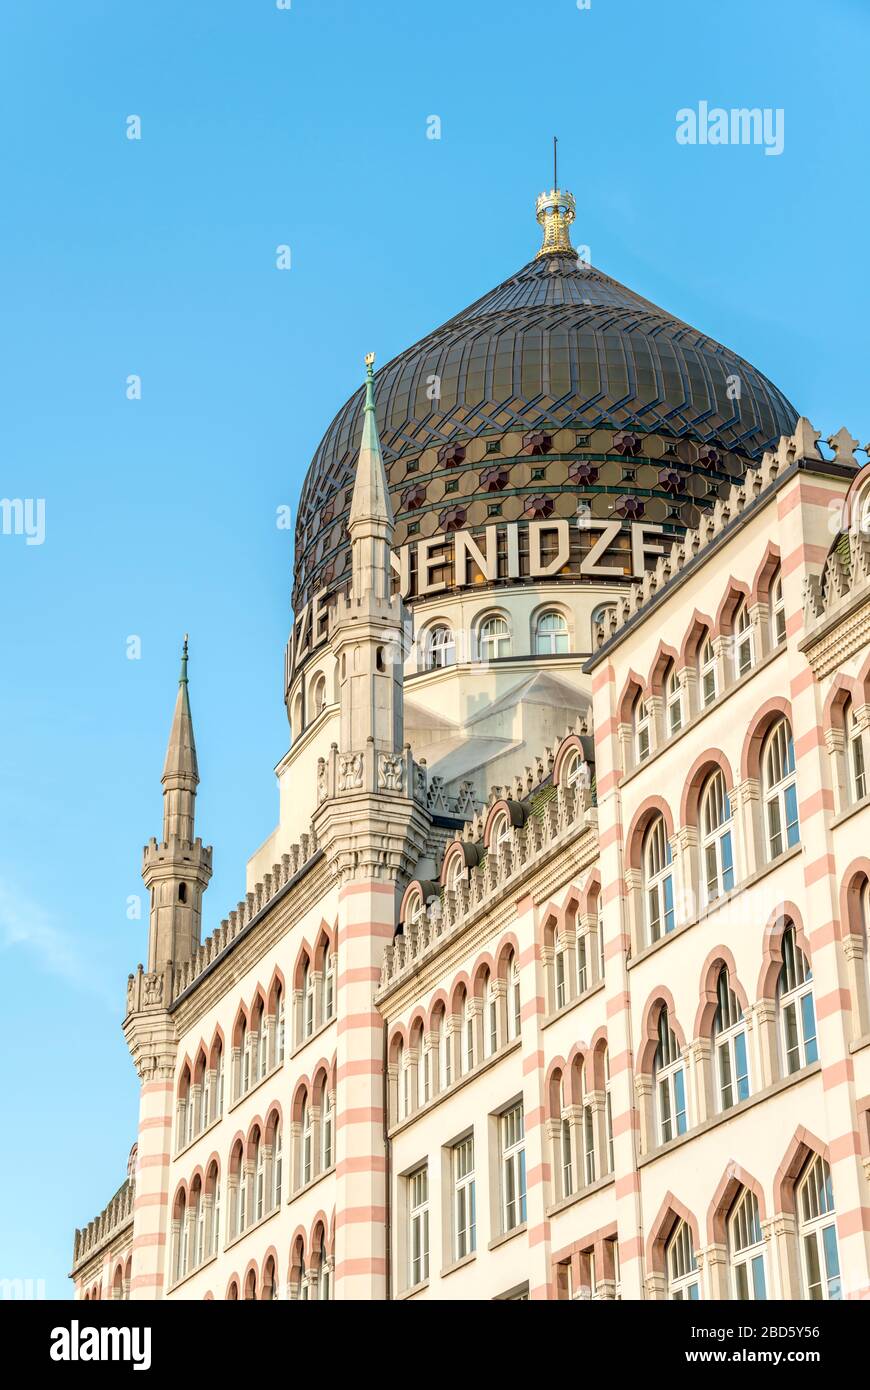 Yenidze Building, the former factory building of a cigarette factory in Dresden, Saxony, Germany Stock Photo